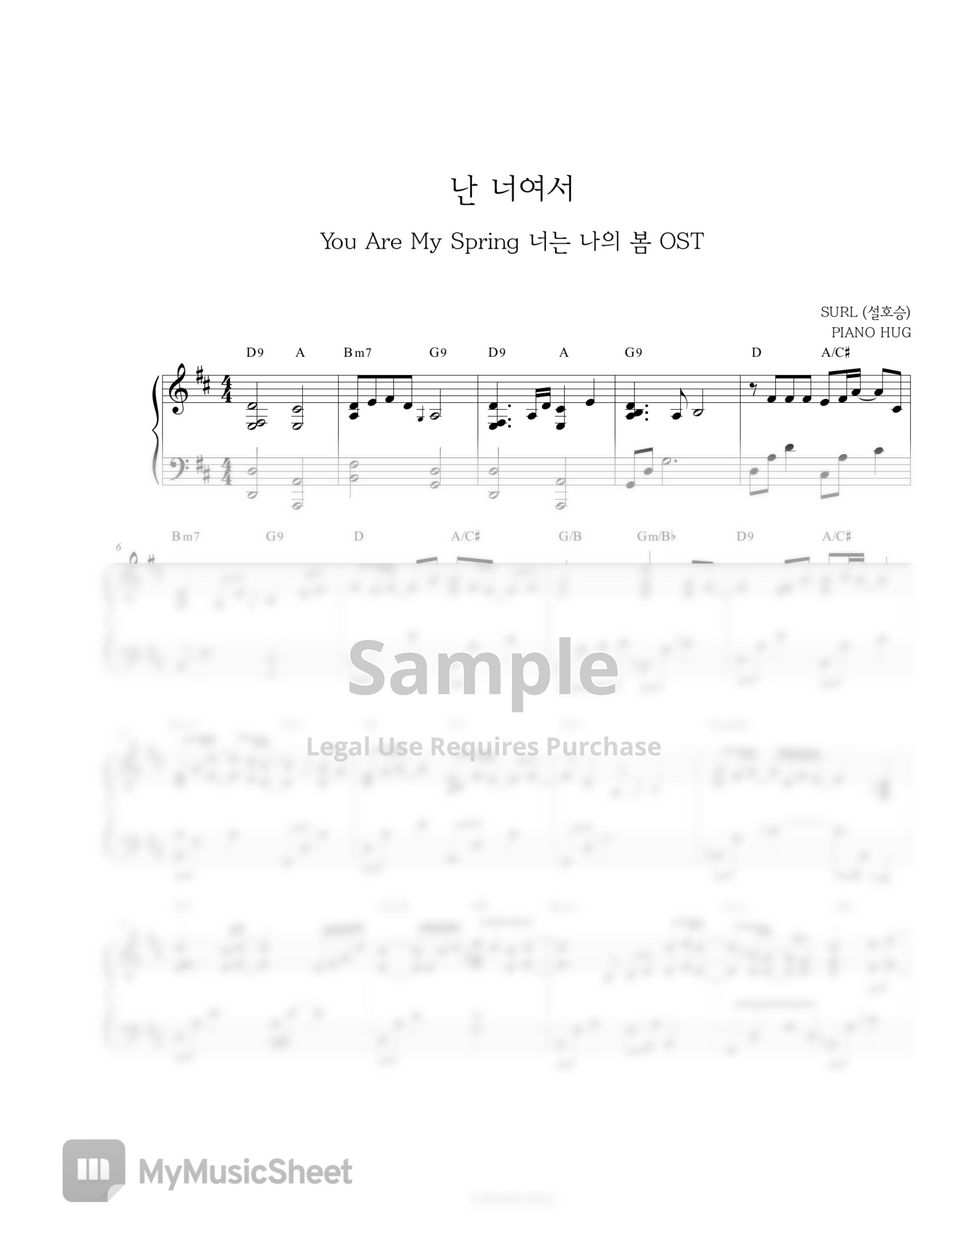 SURL (Seol Ho Seung) - Because It's You (You Are My Spring OST) by Piano Hug